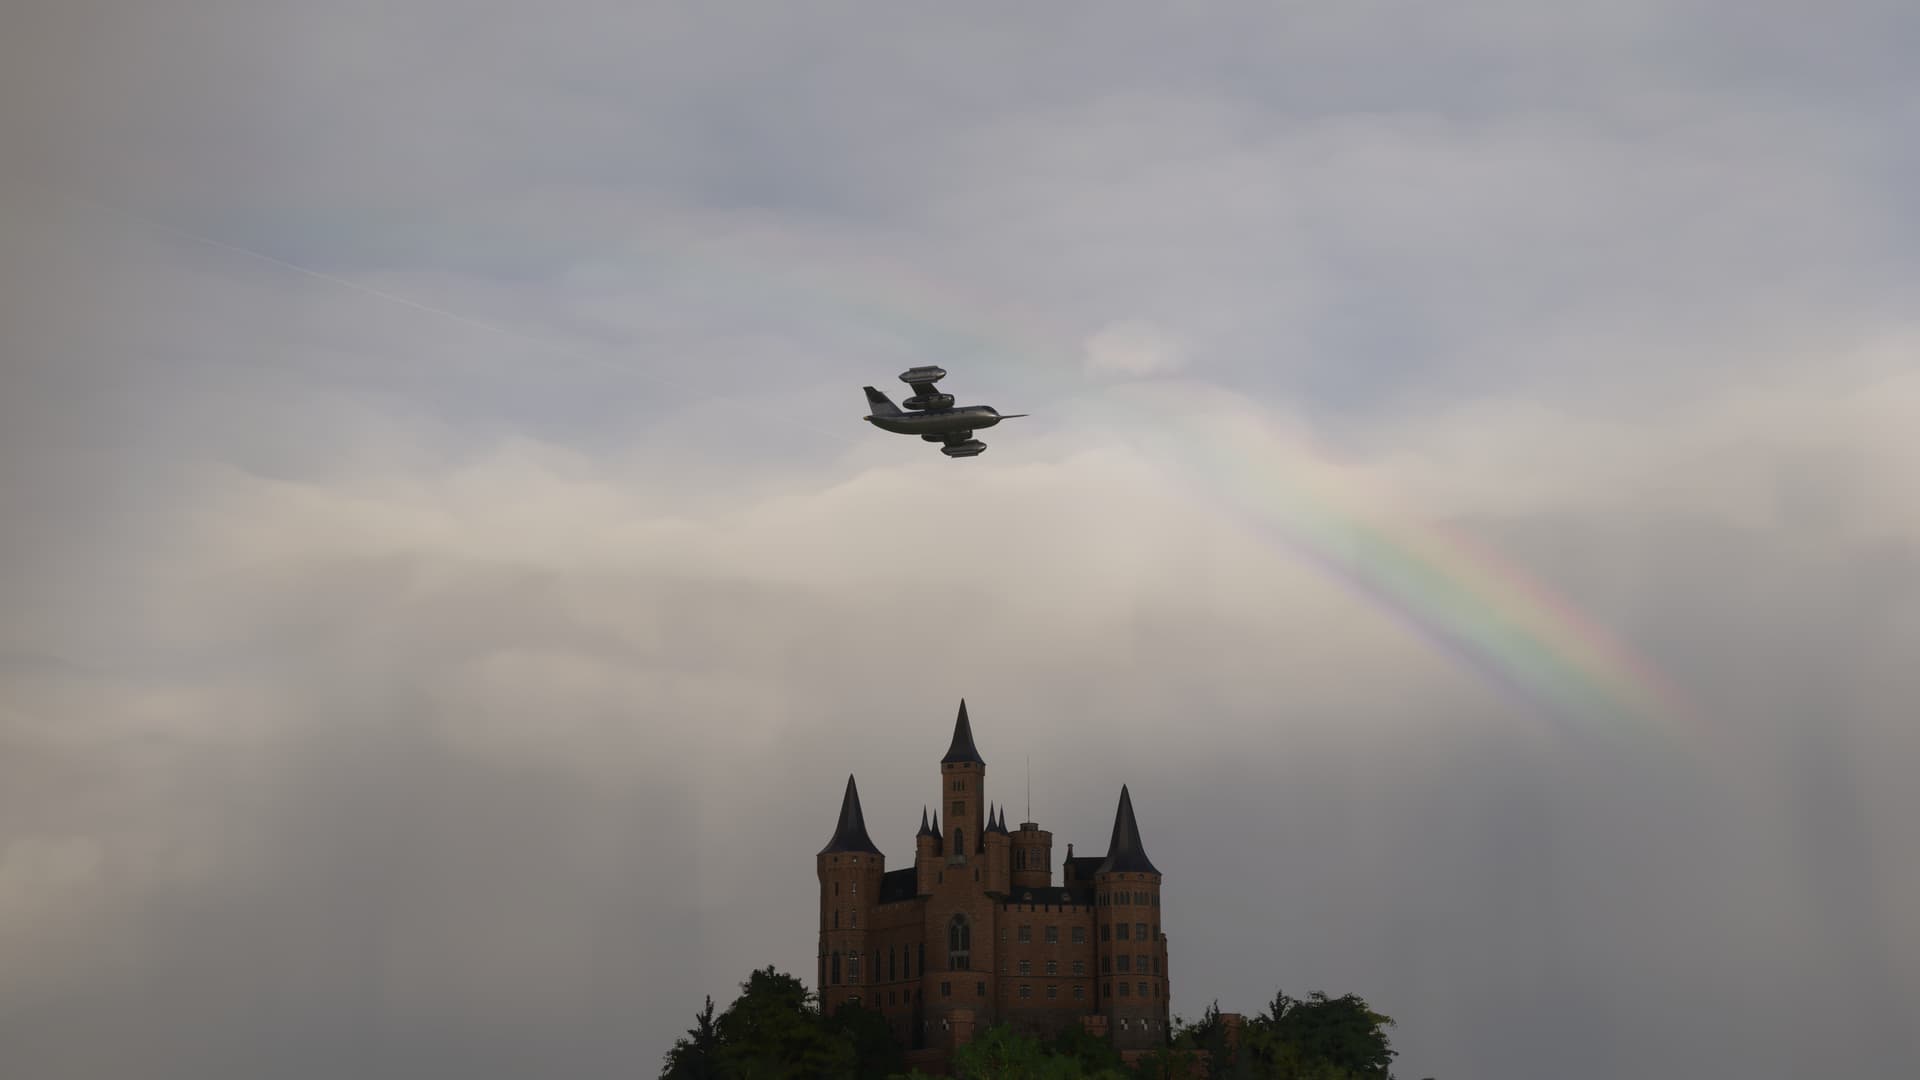 The Dornier Do-31 flies overhead a castle with a rainbow peaking through the clouds behind